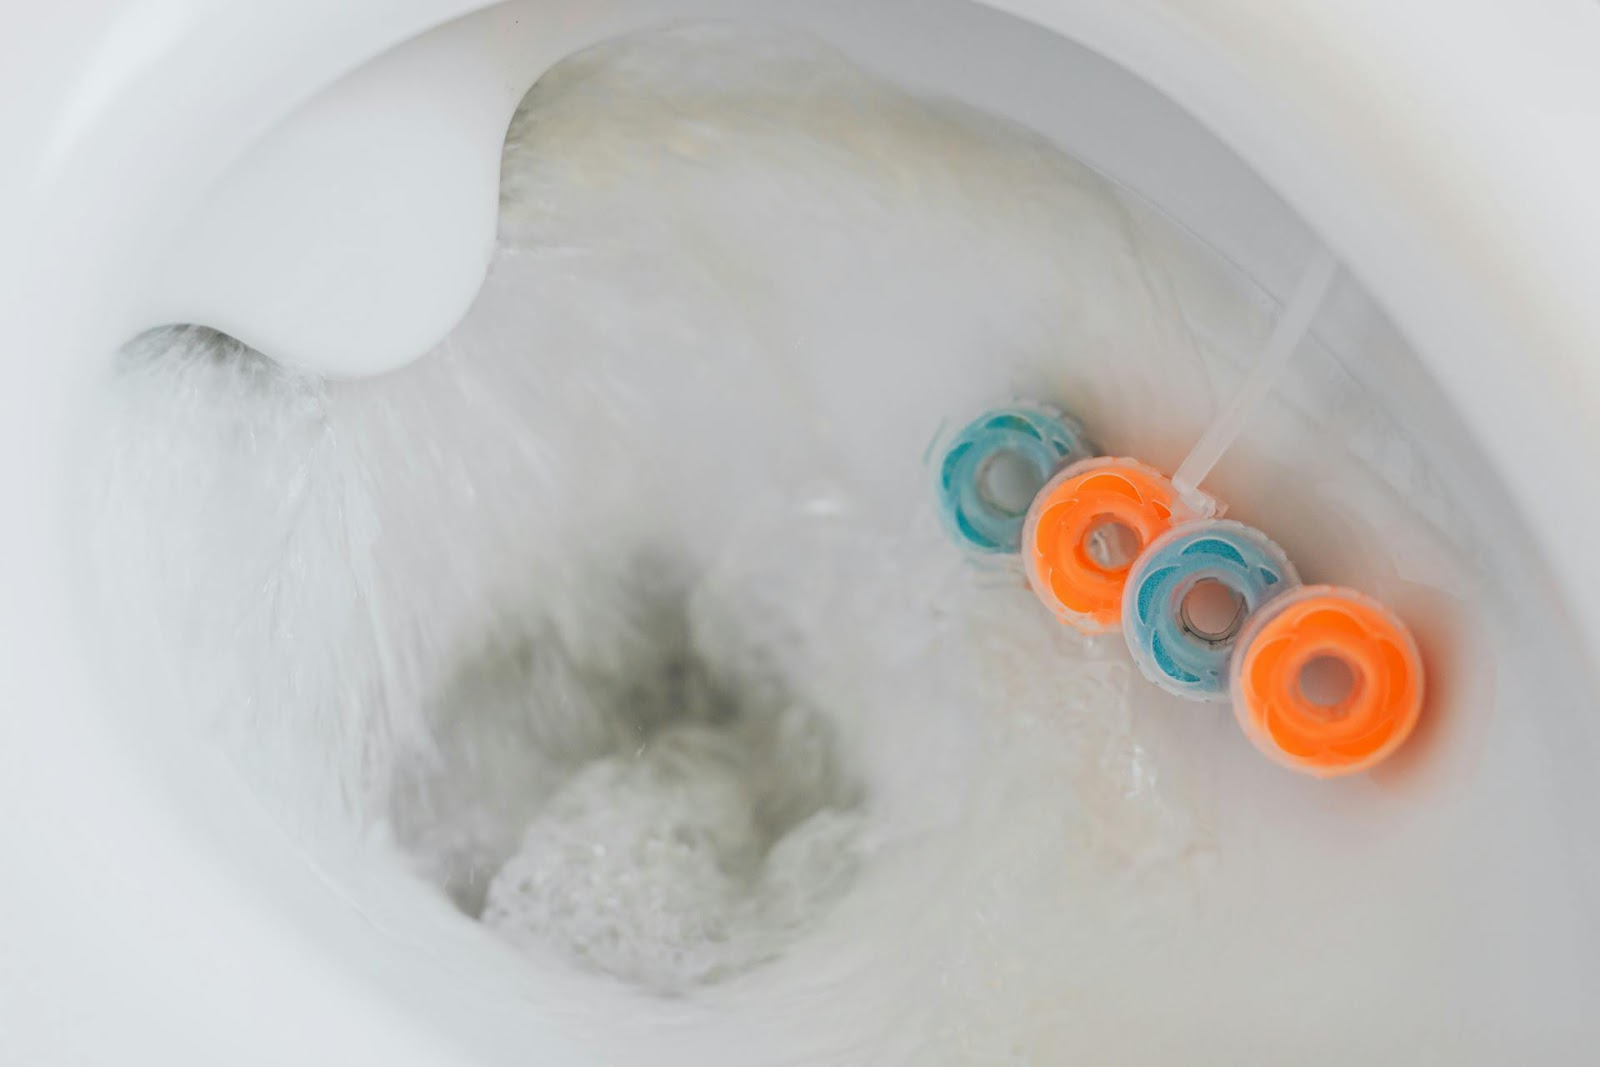 best toilet cleaners - a flushing bowl with automatic cleaners